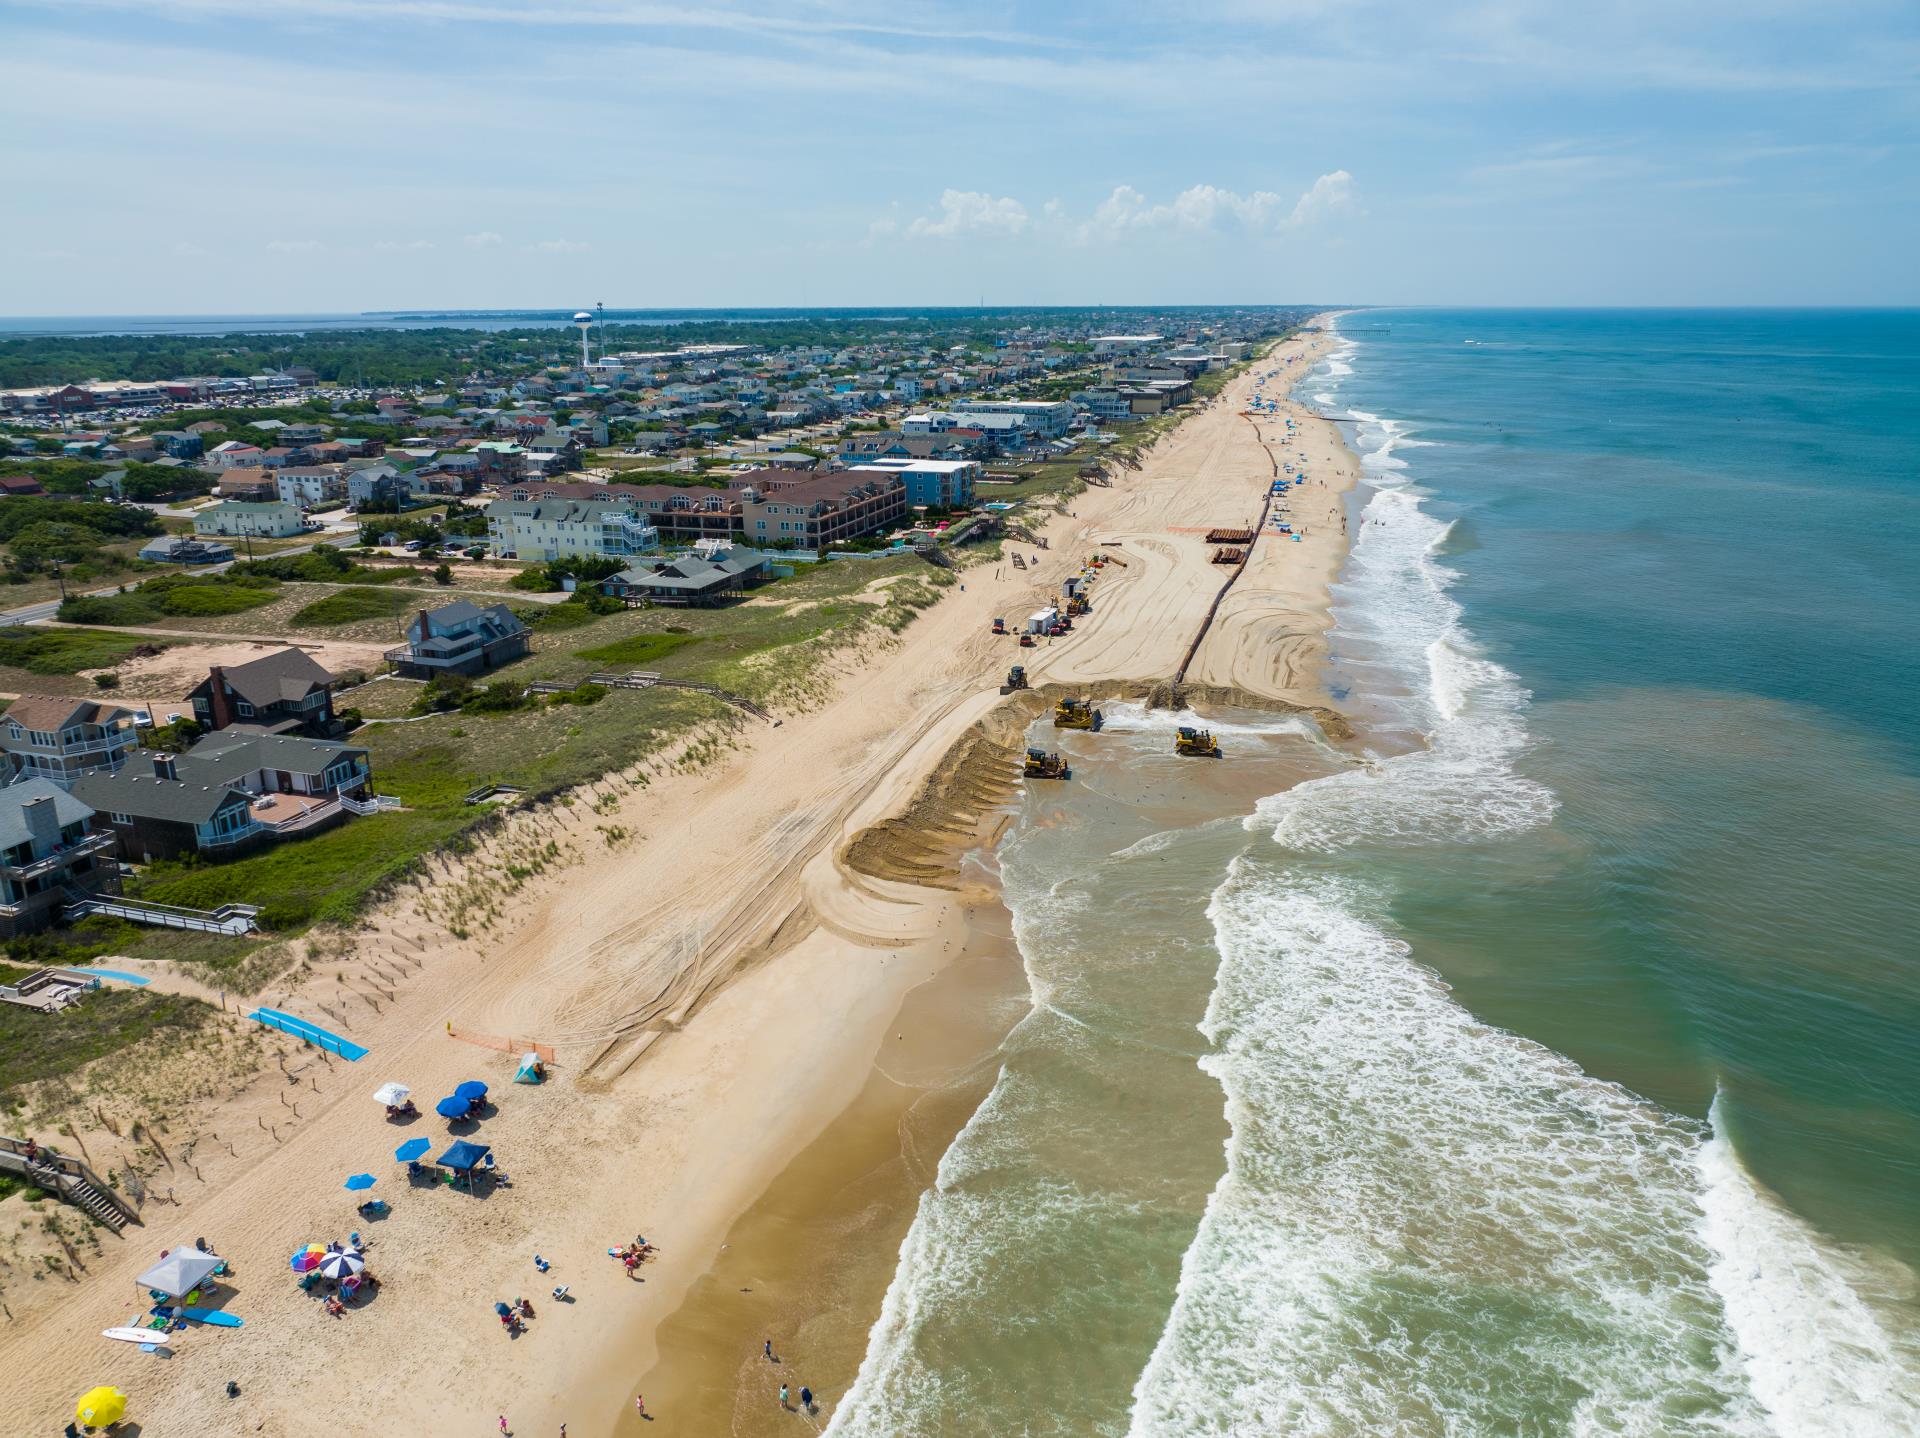 Aerial view of Kill Devil Hills beachgoers enjoying the beach while beach nourishment takes places nearby.